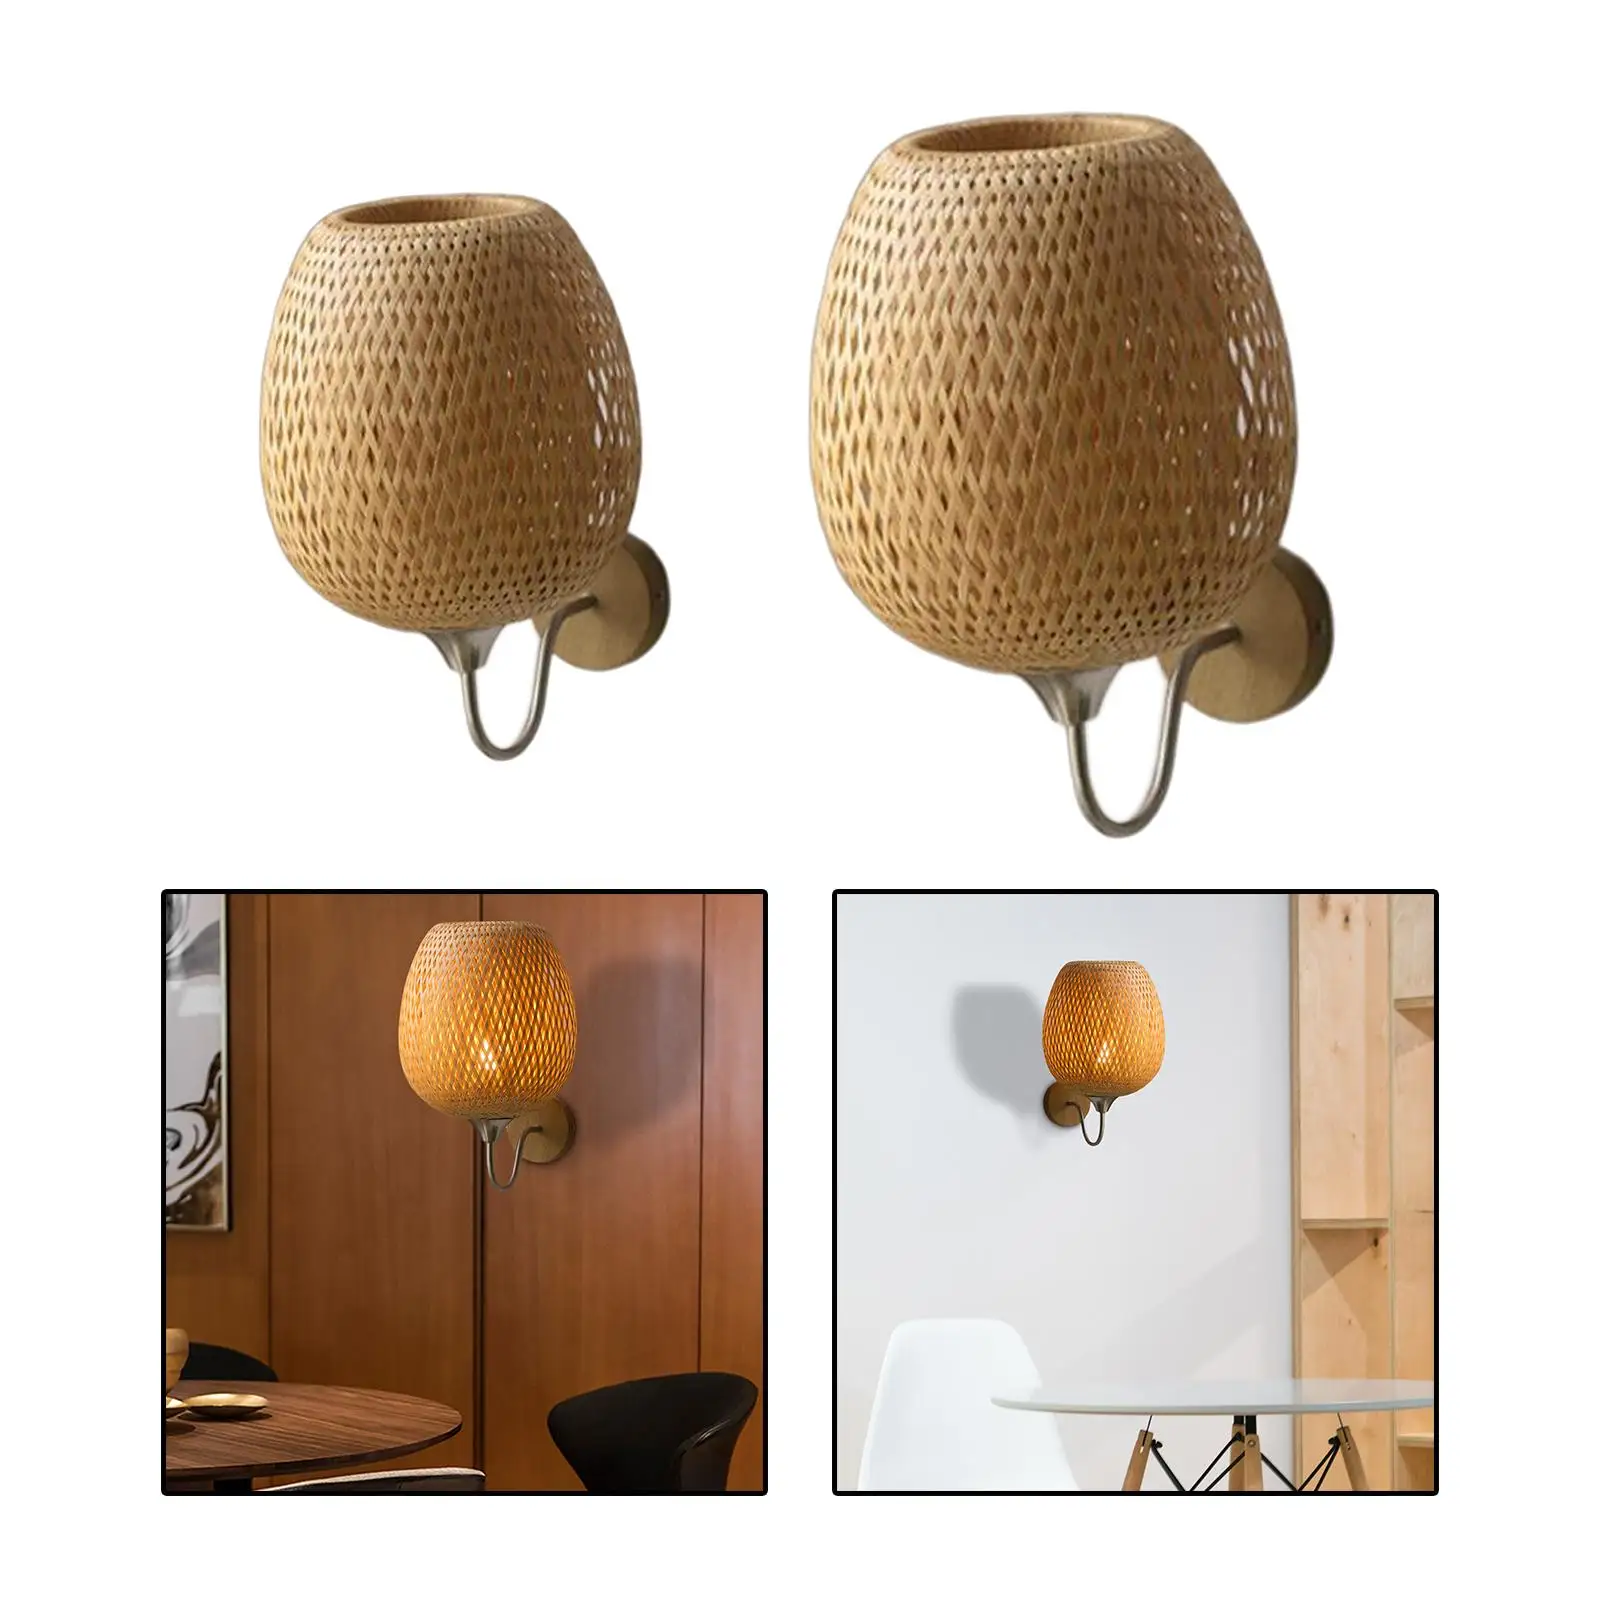 Rattan Bamboo Wall Sconce Light Fixture Vintage Lighting Fixture for Porch